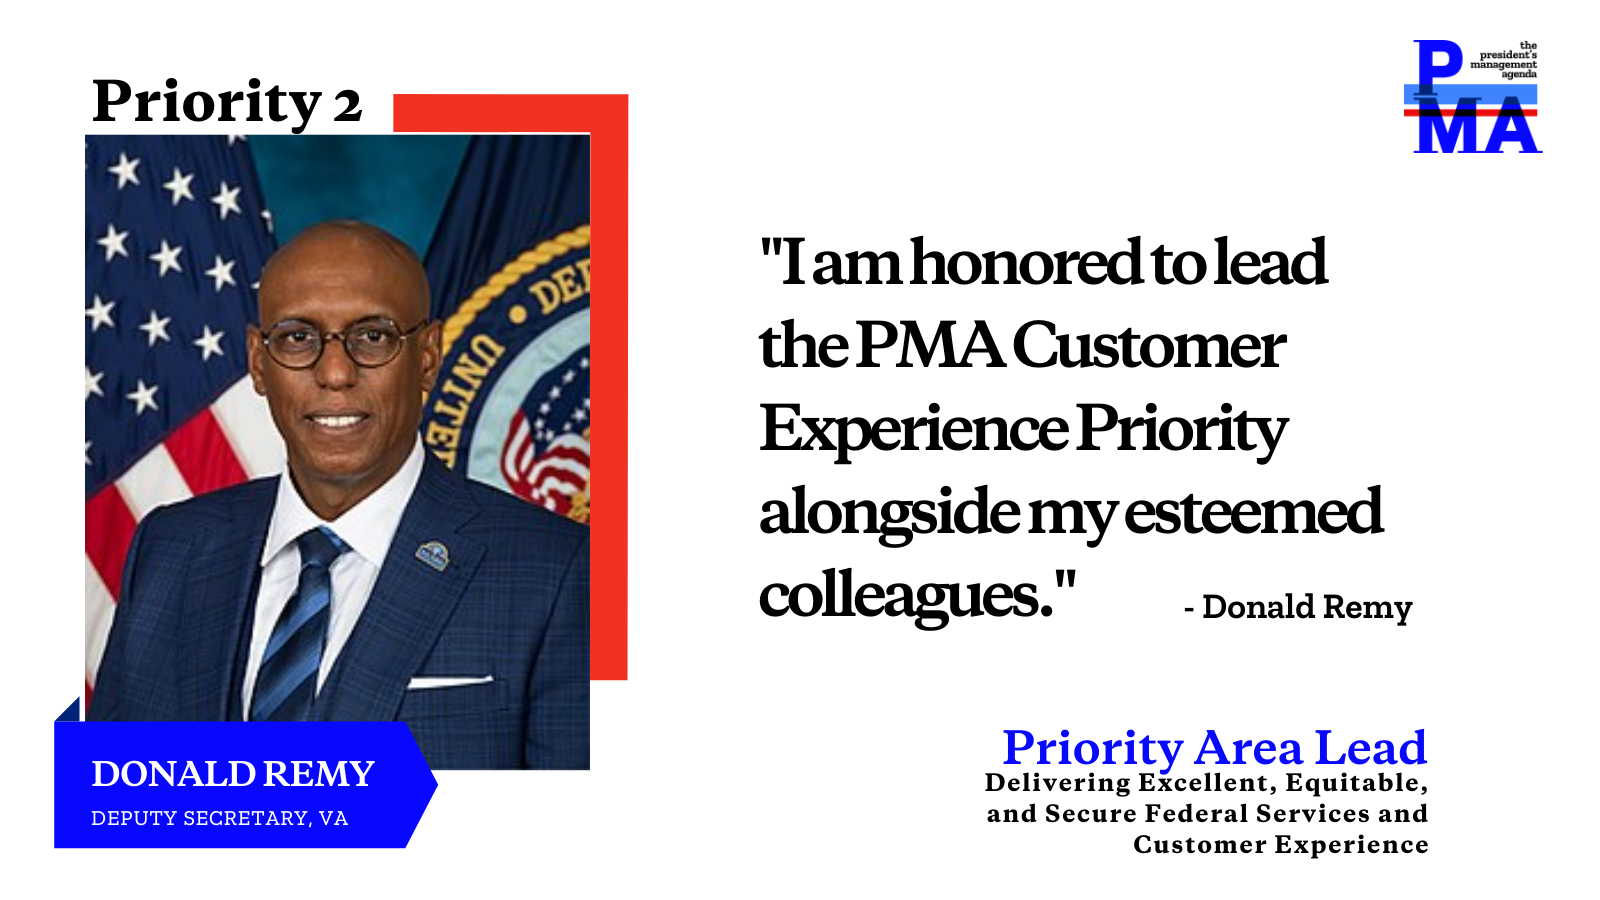 Social card of Donald Remy with text: I am honored to lead the PMA Customer Experience Priority alongside my esteemed colleagues.